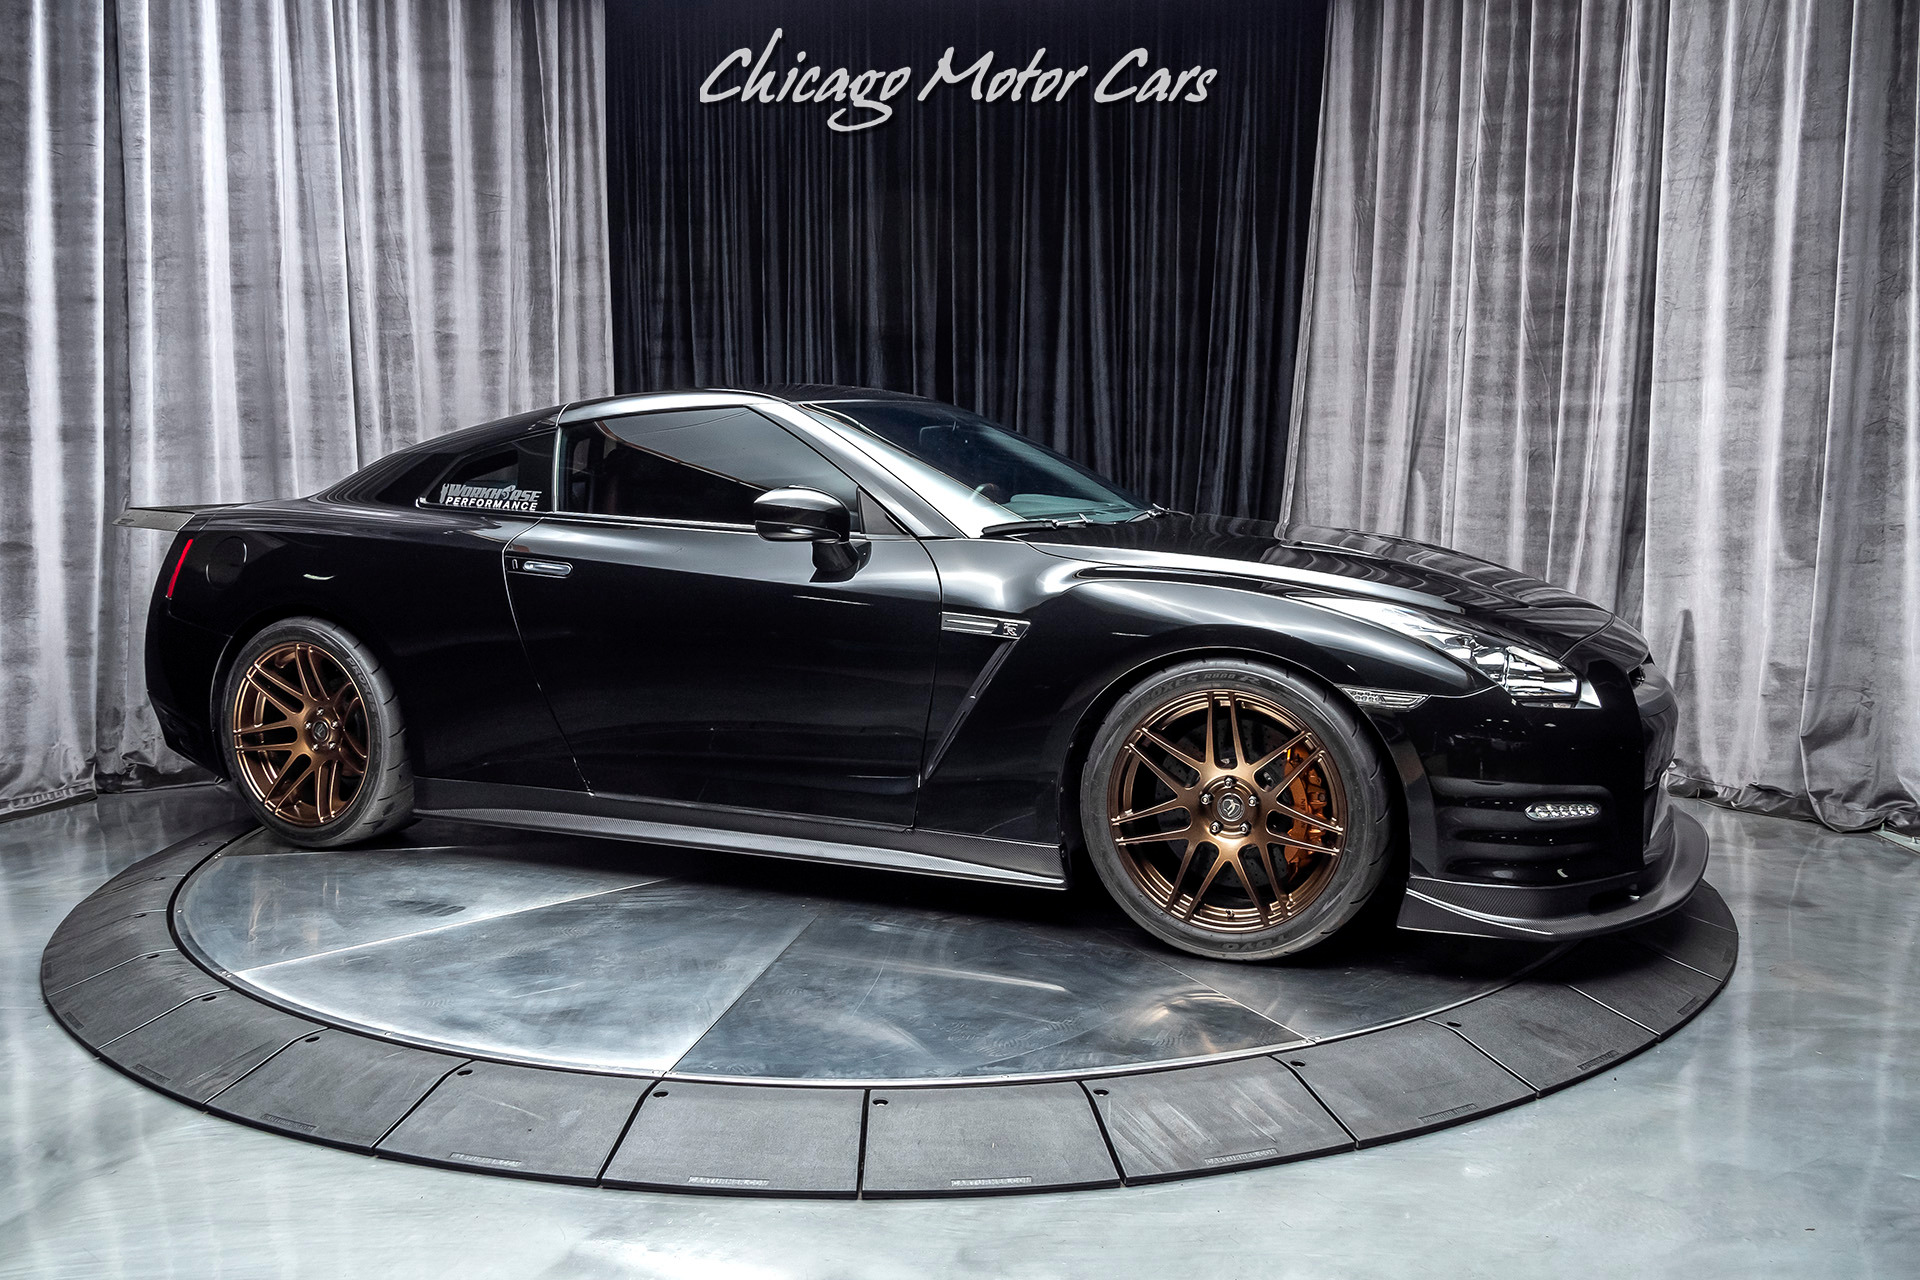 Used-2013-Nissan-GT-R-Black-Edition-1469WHP-ETS-PRO1700-SHEP-TRANS